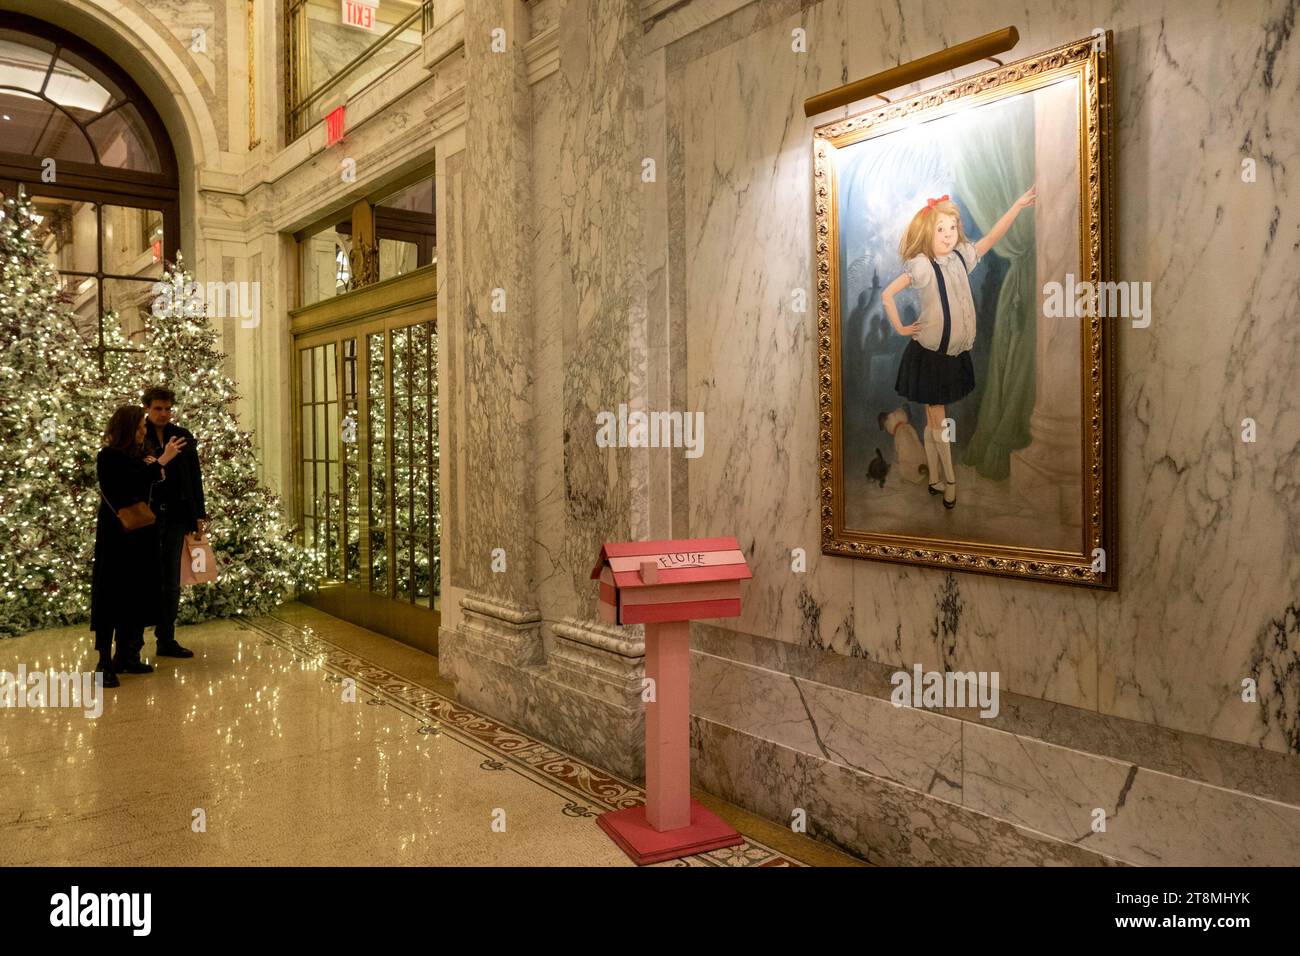 A portrait and mailbox for the fictional character, Eloise, is prominently featured in the interior of the Plaza hotel, 2023, New York City, USA. Stock Photo